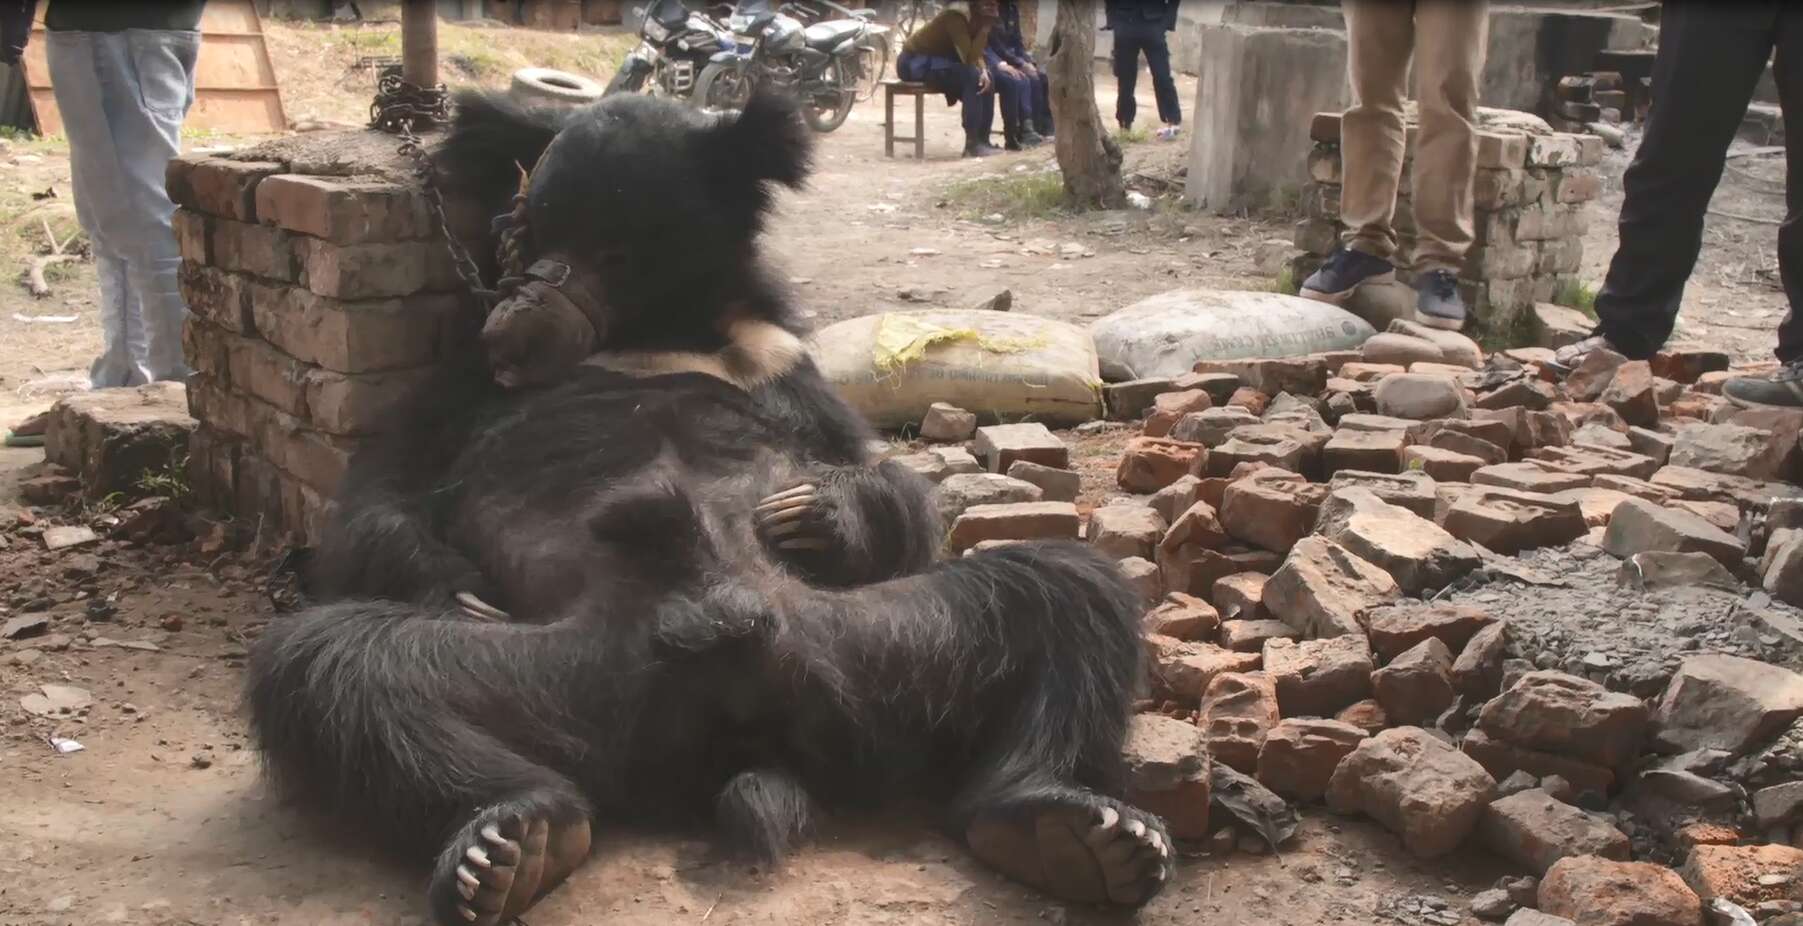 Sloth bear chained up outside